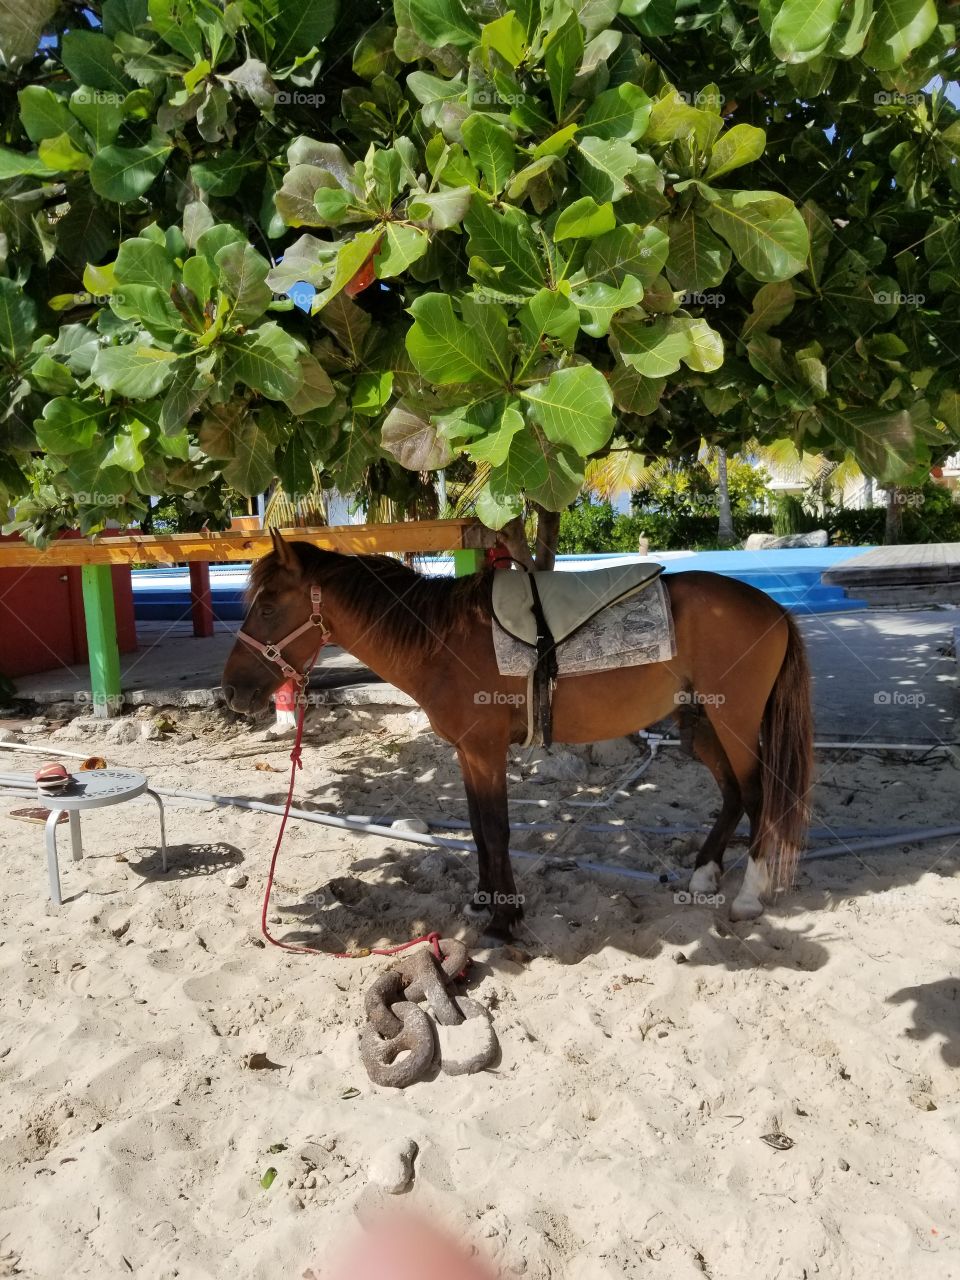 A Pony on the beach in Grand Turk